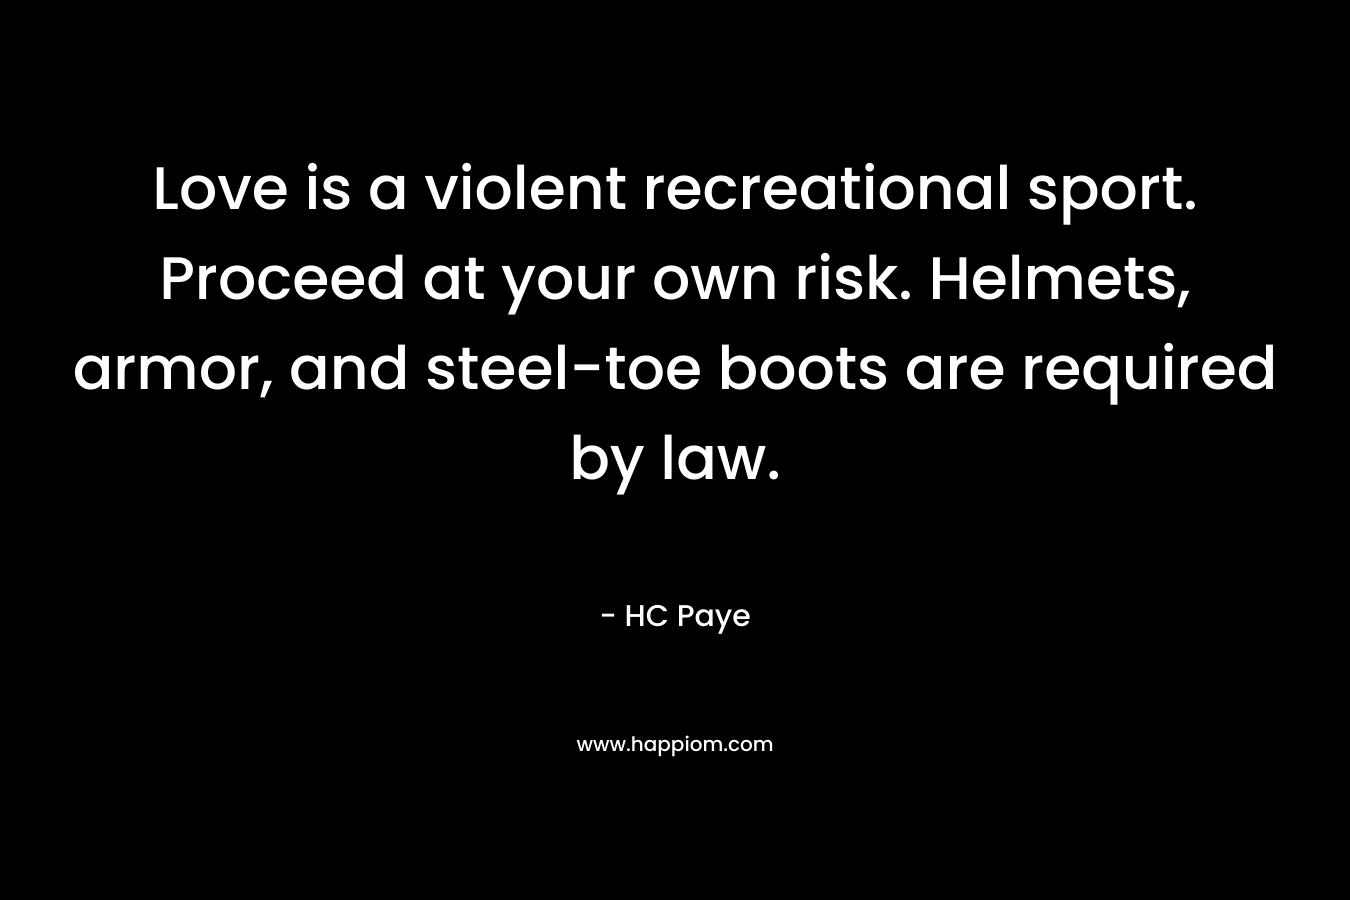 Love is a violent recreational sport. Proceed at your own risk. Helmets, armor, and steel-toe boots are required by law. – HC Paye